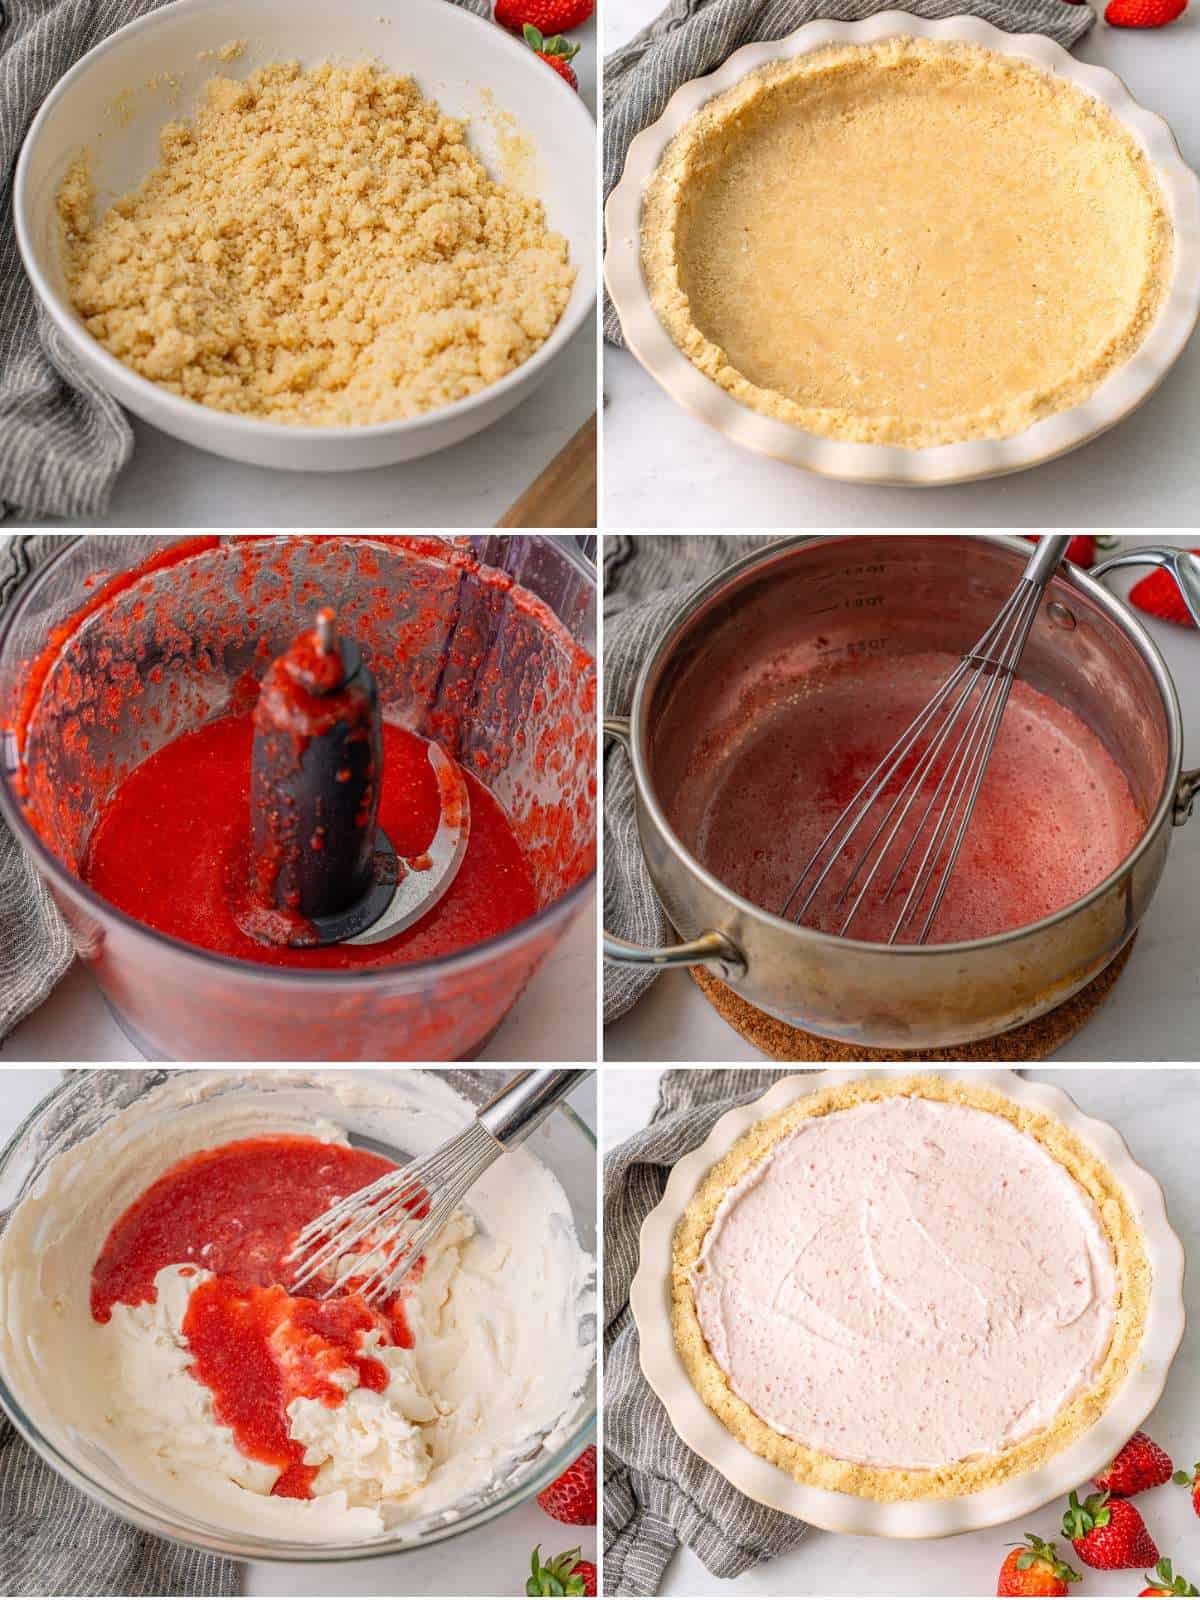 A collage of 6 images showing how to make Keto Strawberry Pie.